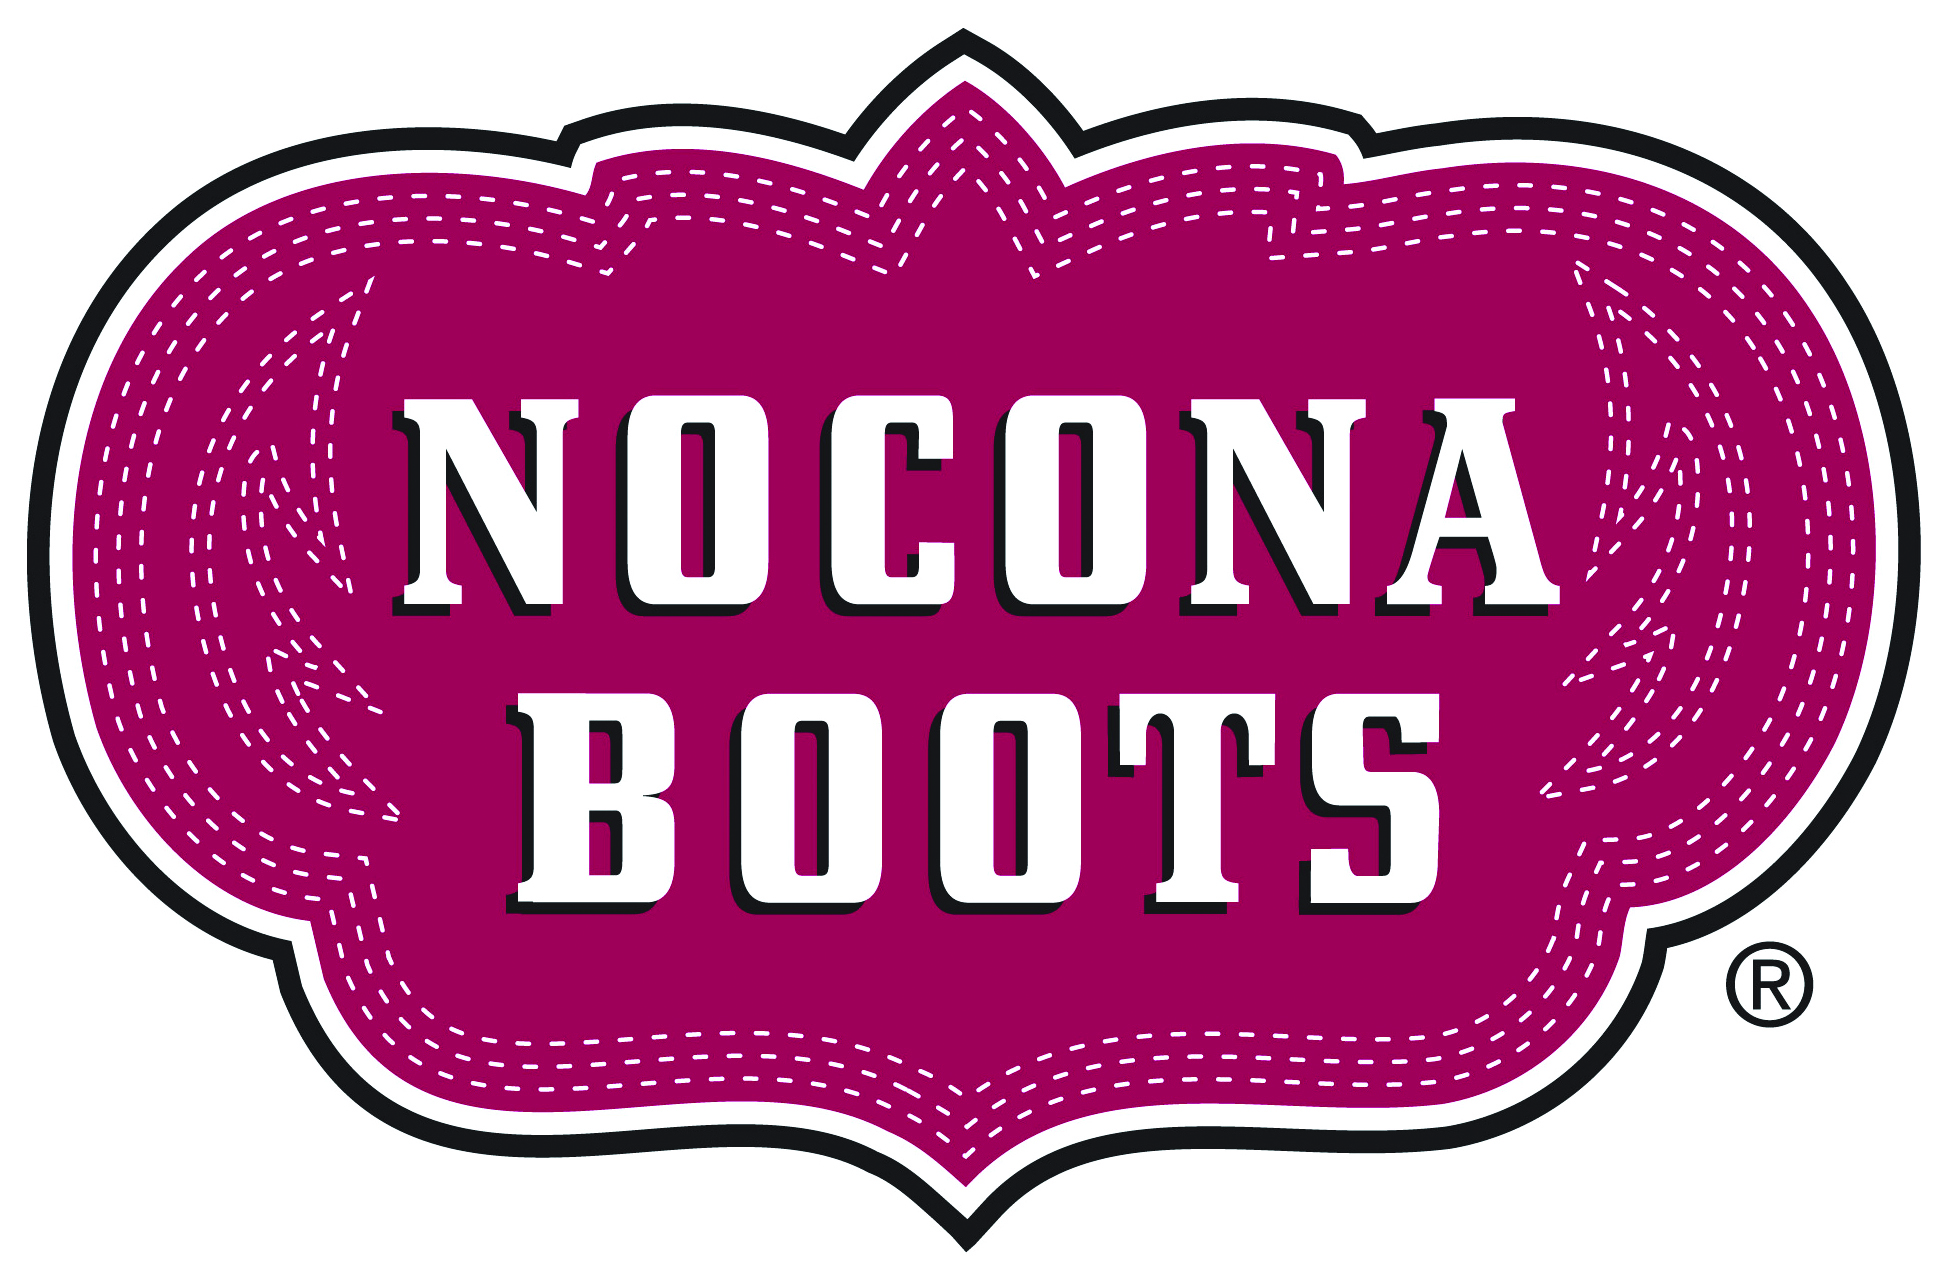 Nocona bootapos.western.wear.boutique.cleburne.alvarado.texas.shoes.boots.jewelry-01.jpg